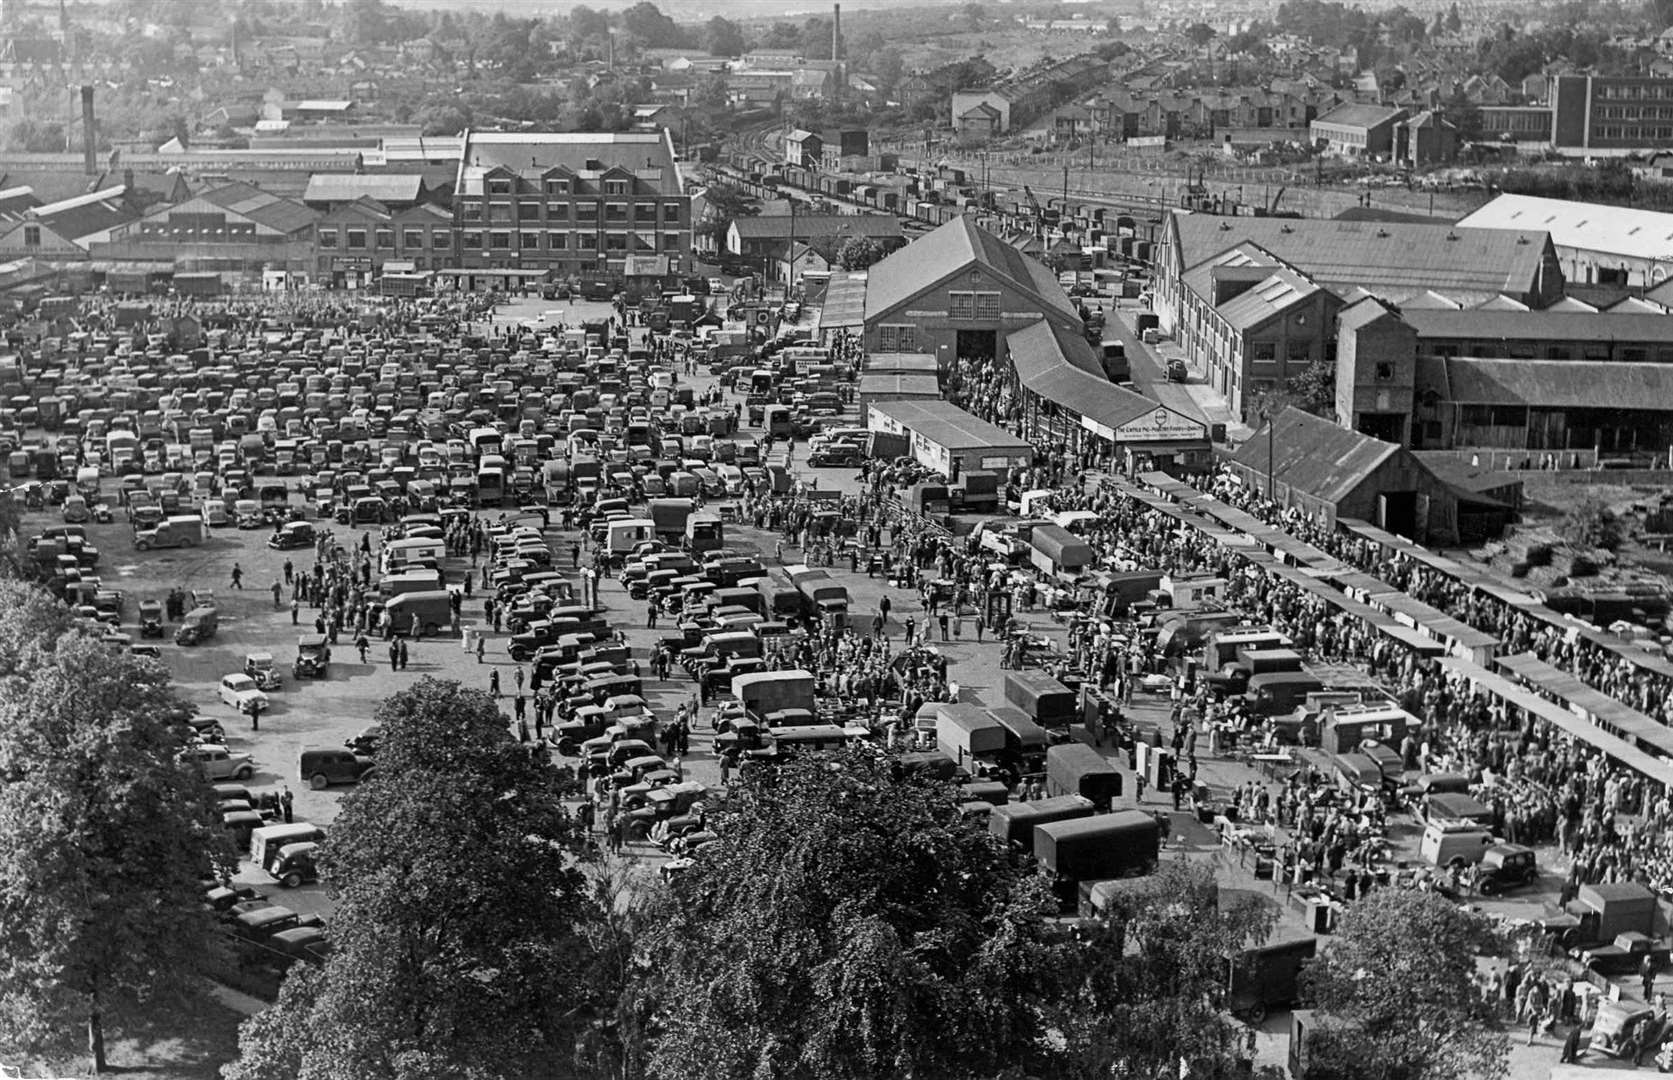 Maidstone Market put the town on the county's business map for centuries. It was first held in 1267. This was the scene at the Lockmeadow home of the market on a typical Tuesday in 1950